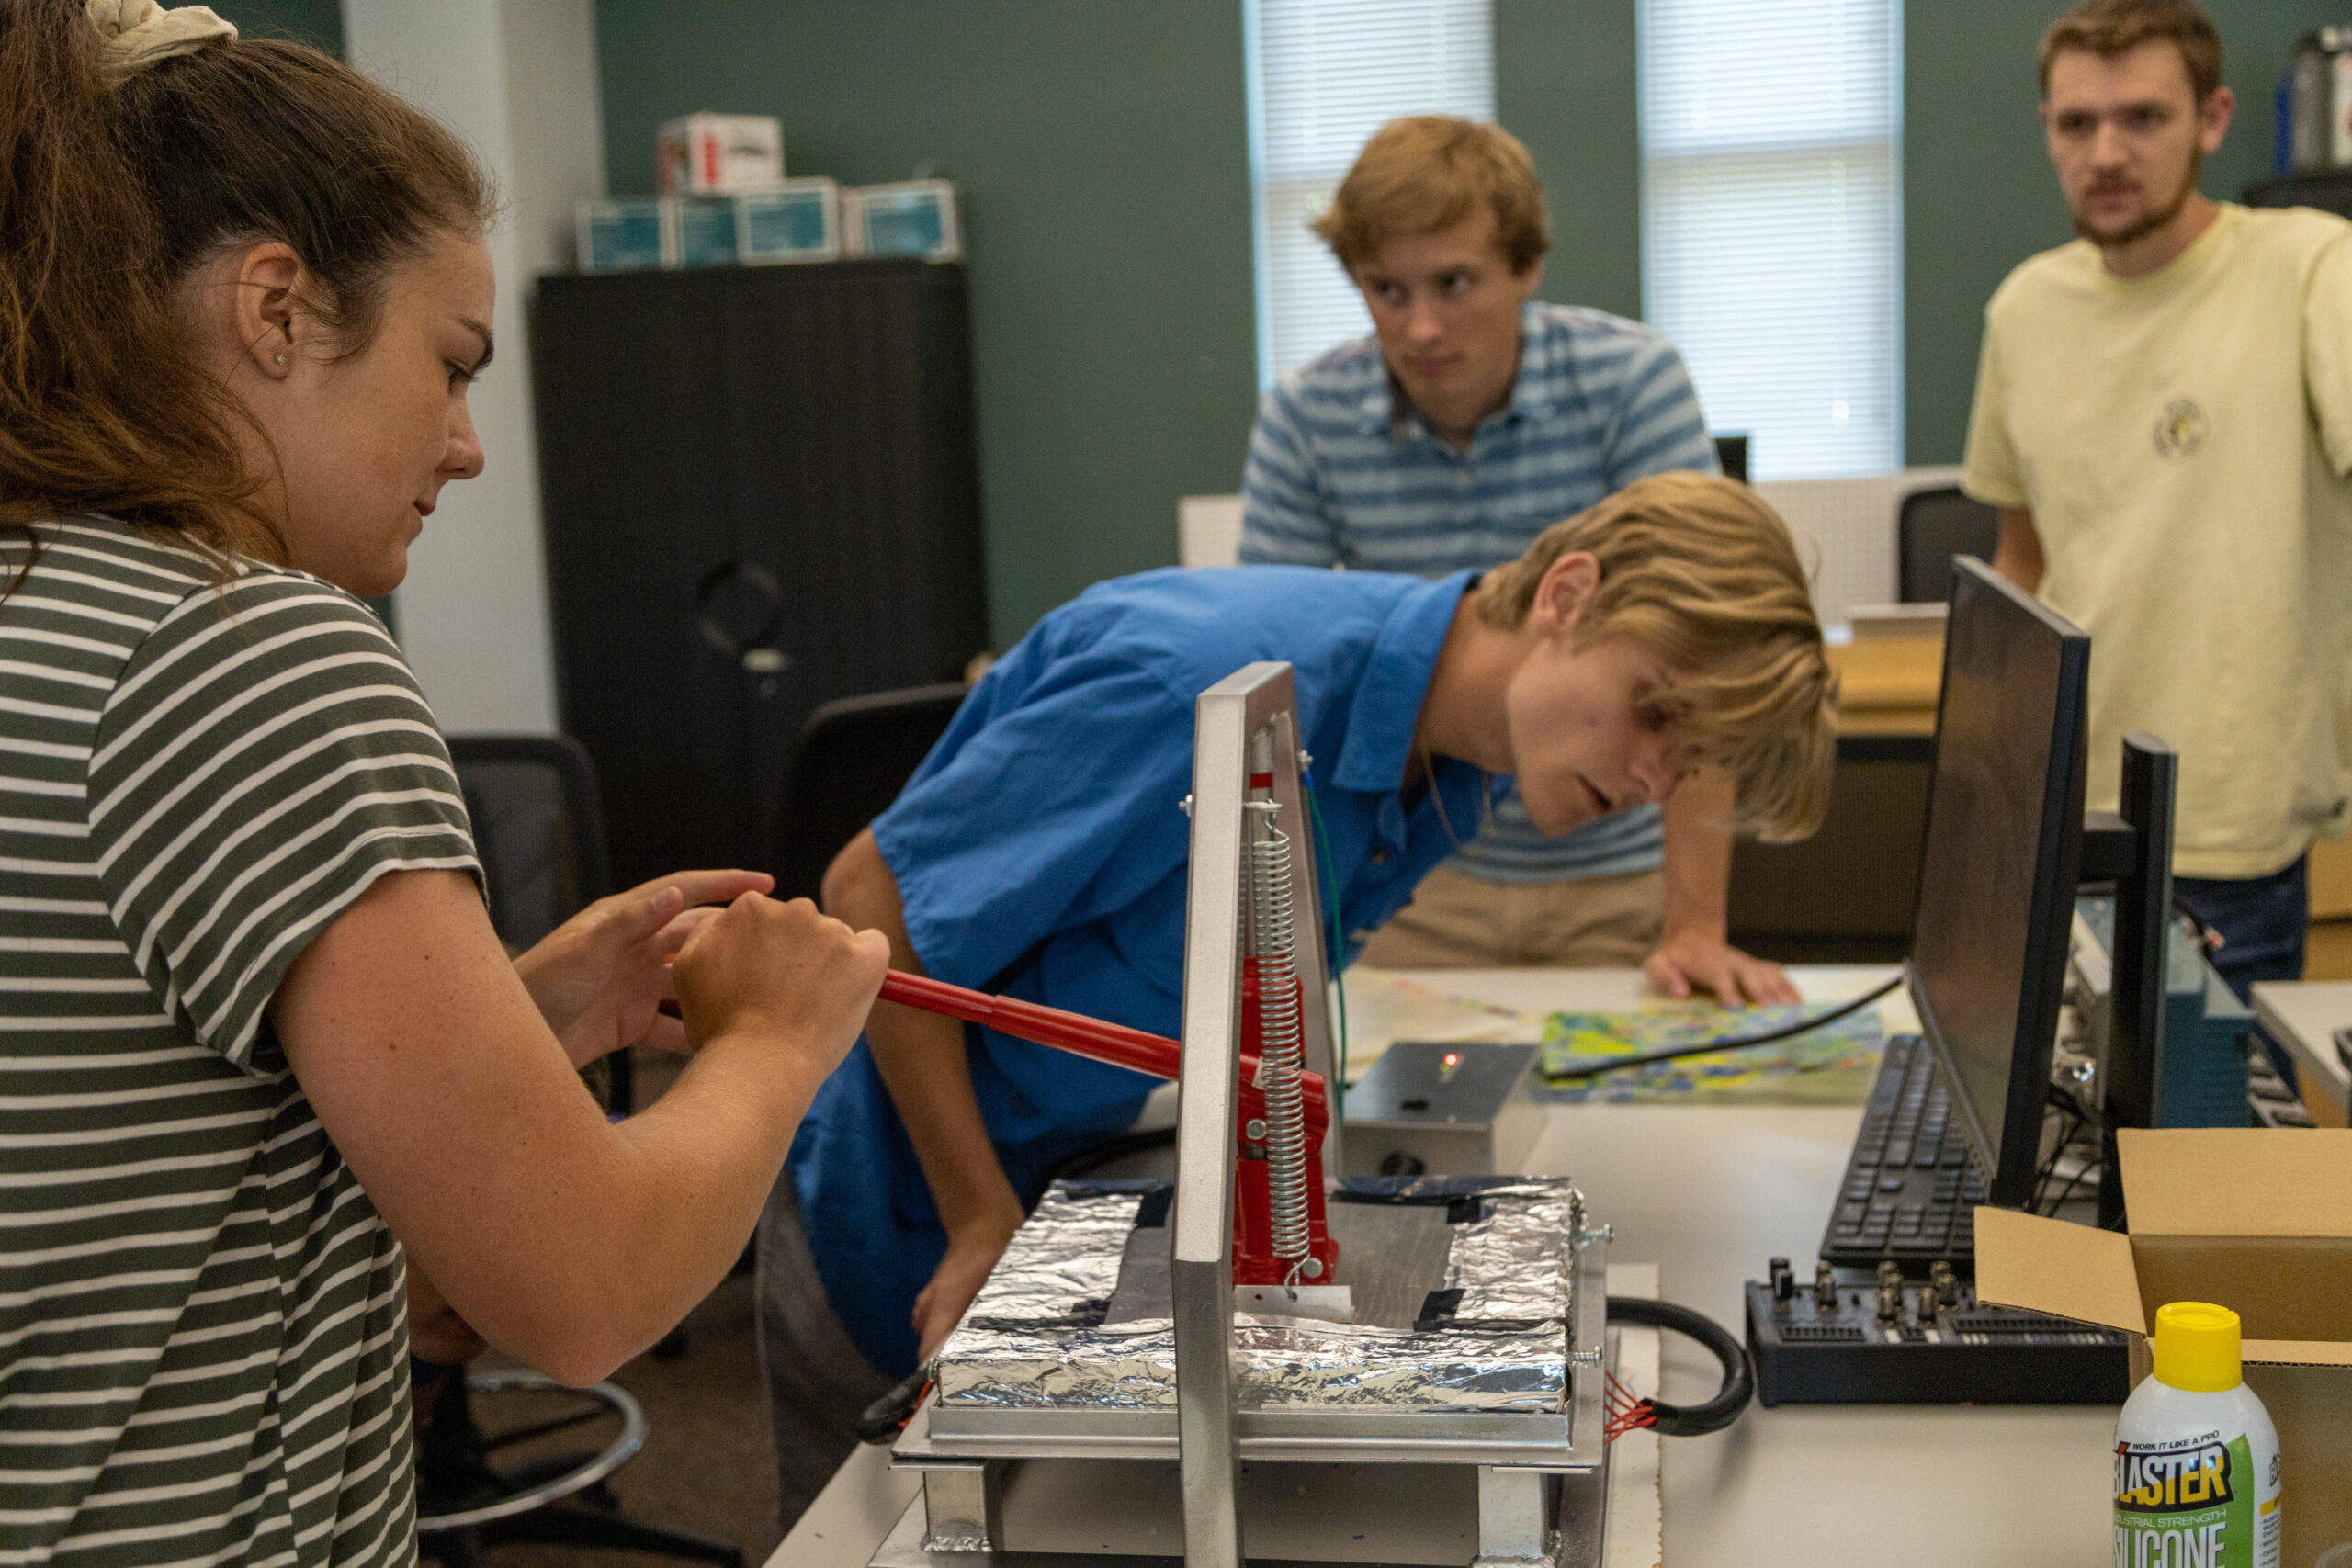 Student compressing a lever in a spring loaded device while other students look on